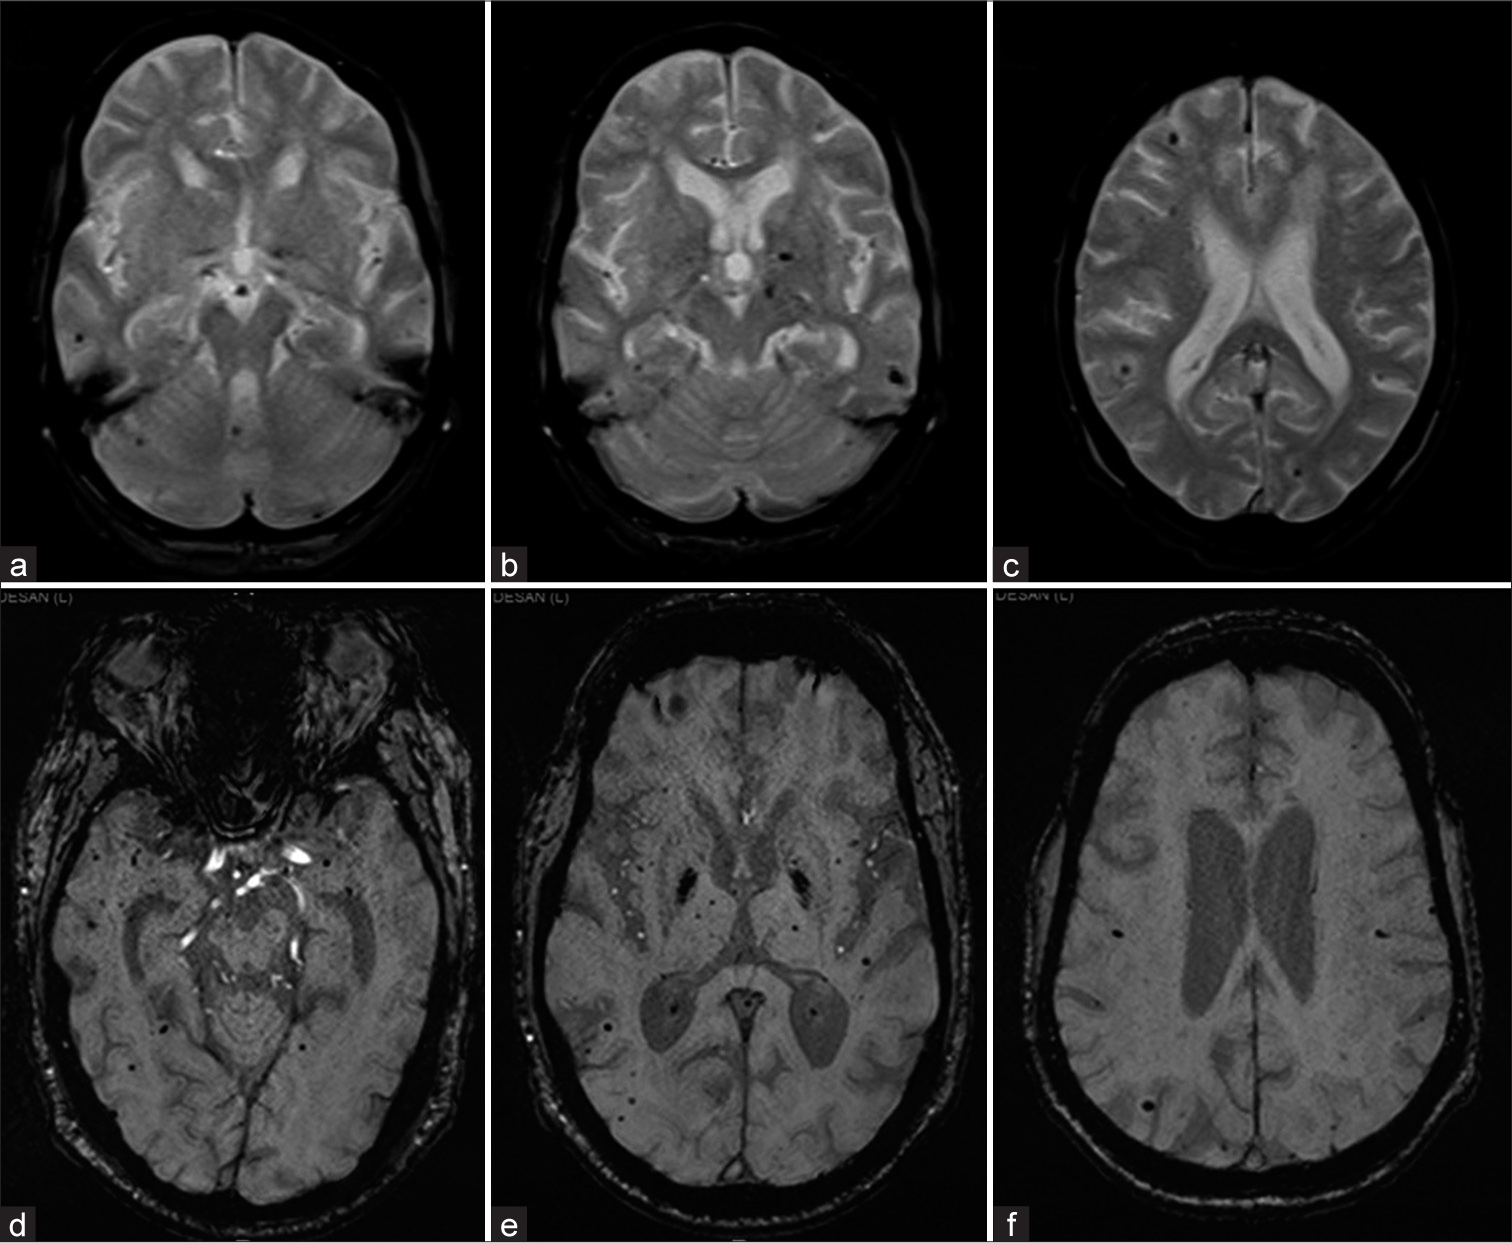 Two different patients with (a-c) GRE T2* axial and (d-f) susceptibility-weighted imaging axial images showing Grade III microbleeds of deep and lobar location.